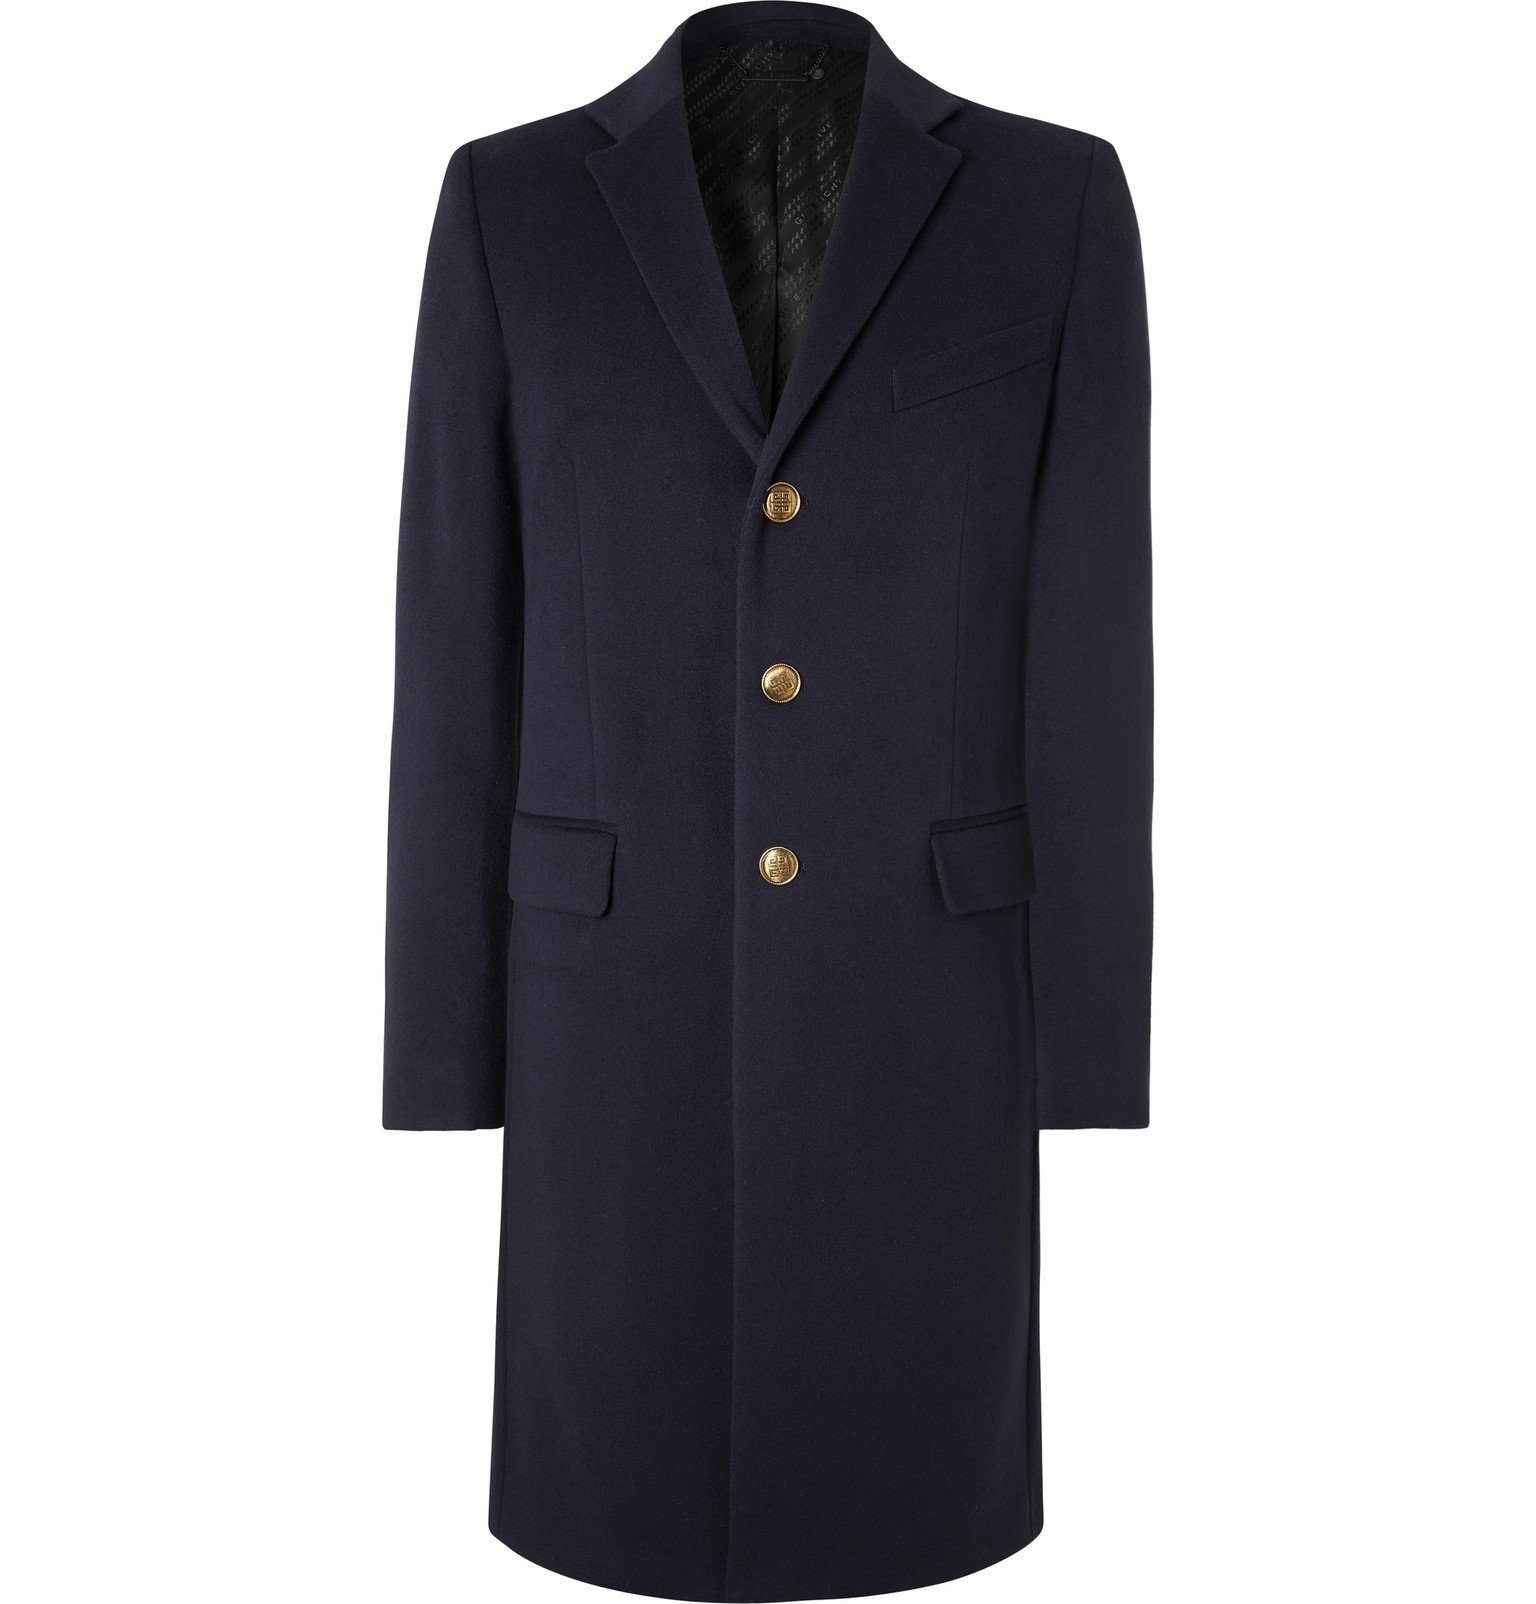 Givenchy - Wool and Cashmere-Blend Overcoat - Blue Givenchy